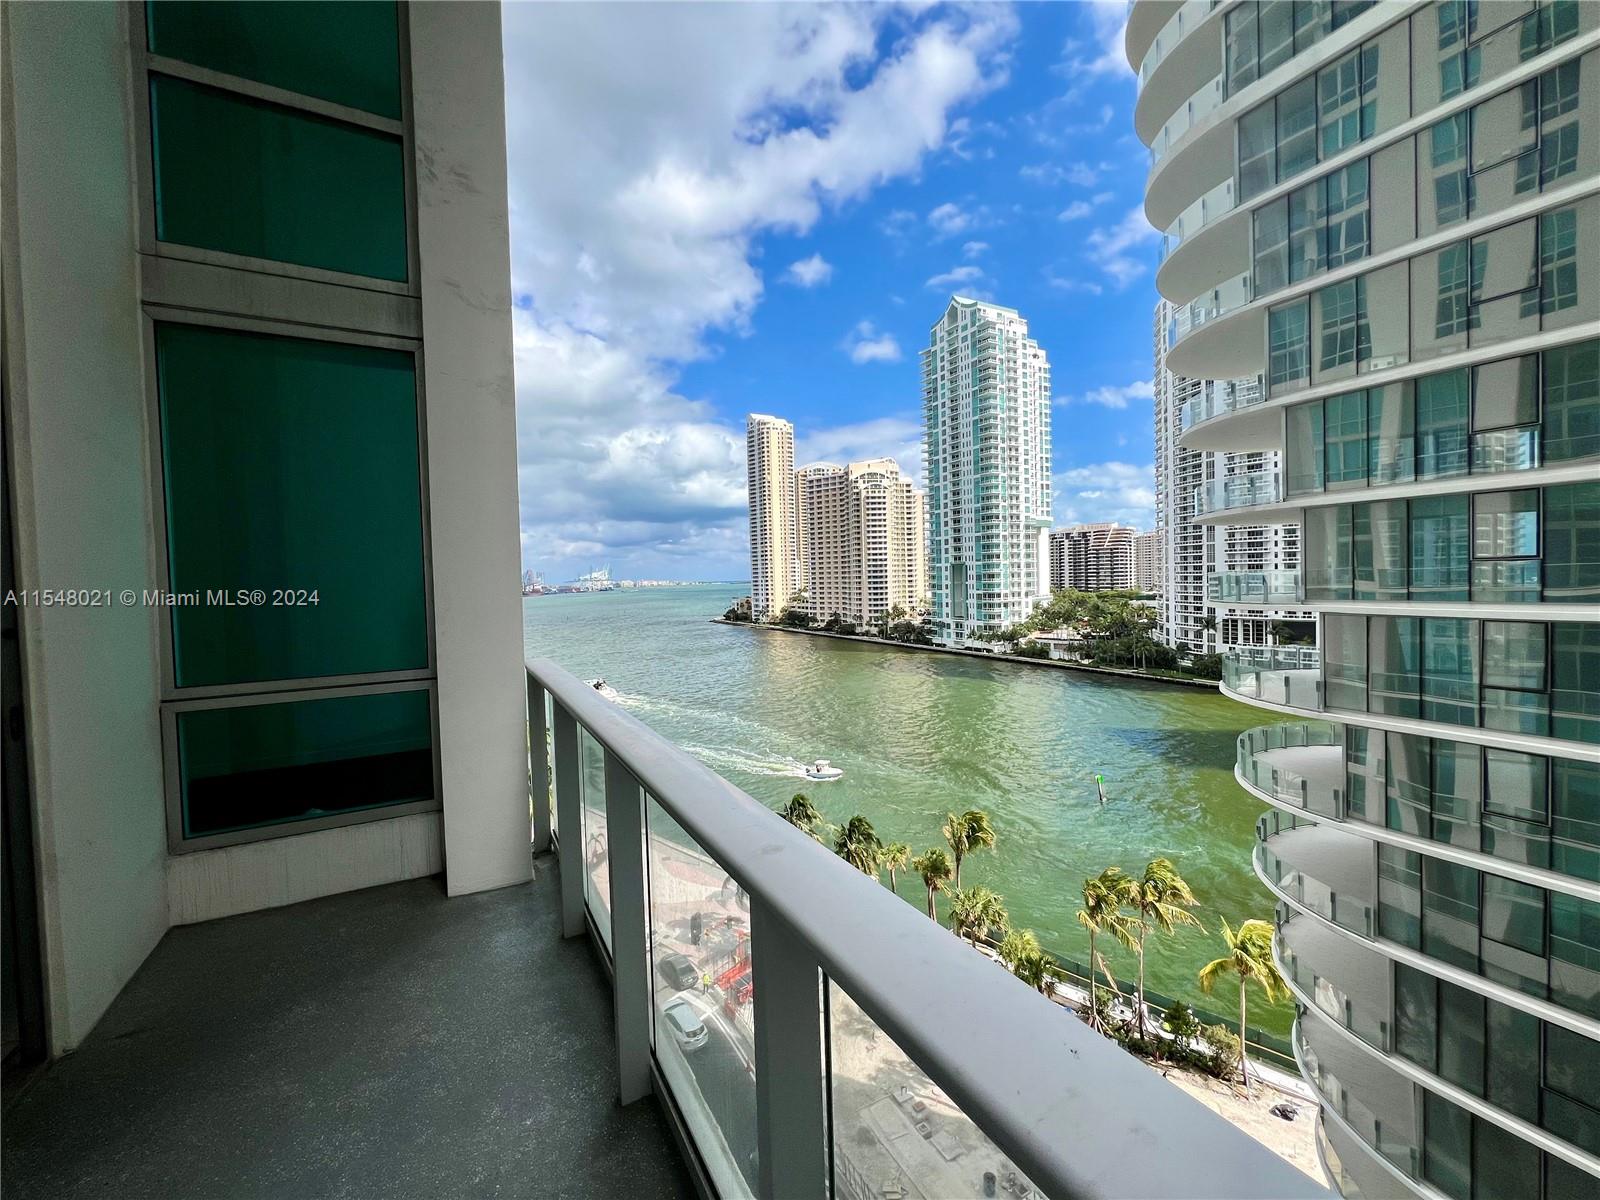 Amazing bay views from this 2-story Loft with South exposure. This one-of-a-kind unit offers 19'4" high ceilings, tile floors throughout, stainless steel appliances, Italian cabinetry. Water, basic cable and Internet included. One assigned parking space on the same floor. Walk to Whole Foods, Brickell, Novikov Restaurant and Joe & the Juice downstairs, plus 17-screen Silverspot Cinema & Gordon Ramsay Hell's Kitchen. Building offers luxurious life style, 24 hr. front desk attended. Chic downtown living at its best! Tenant occupied until 3/15/24
Pool is currently closed for repairs.